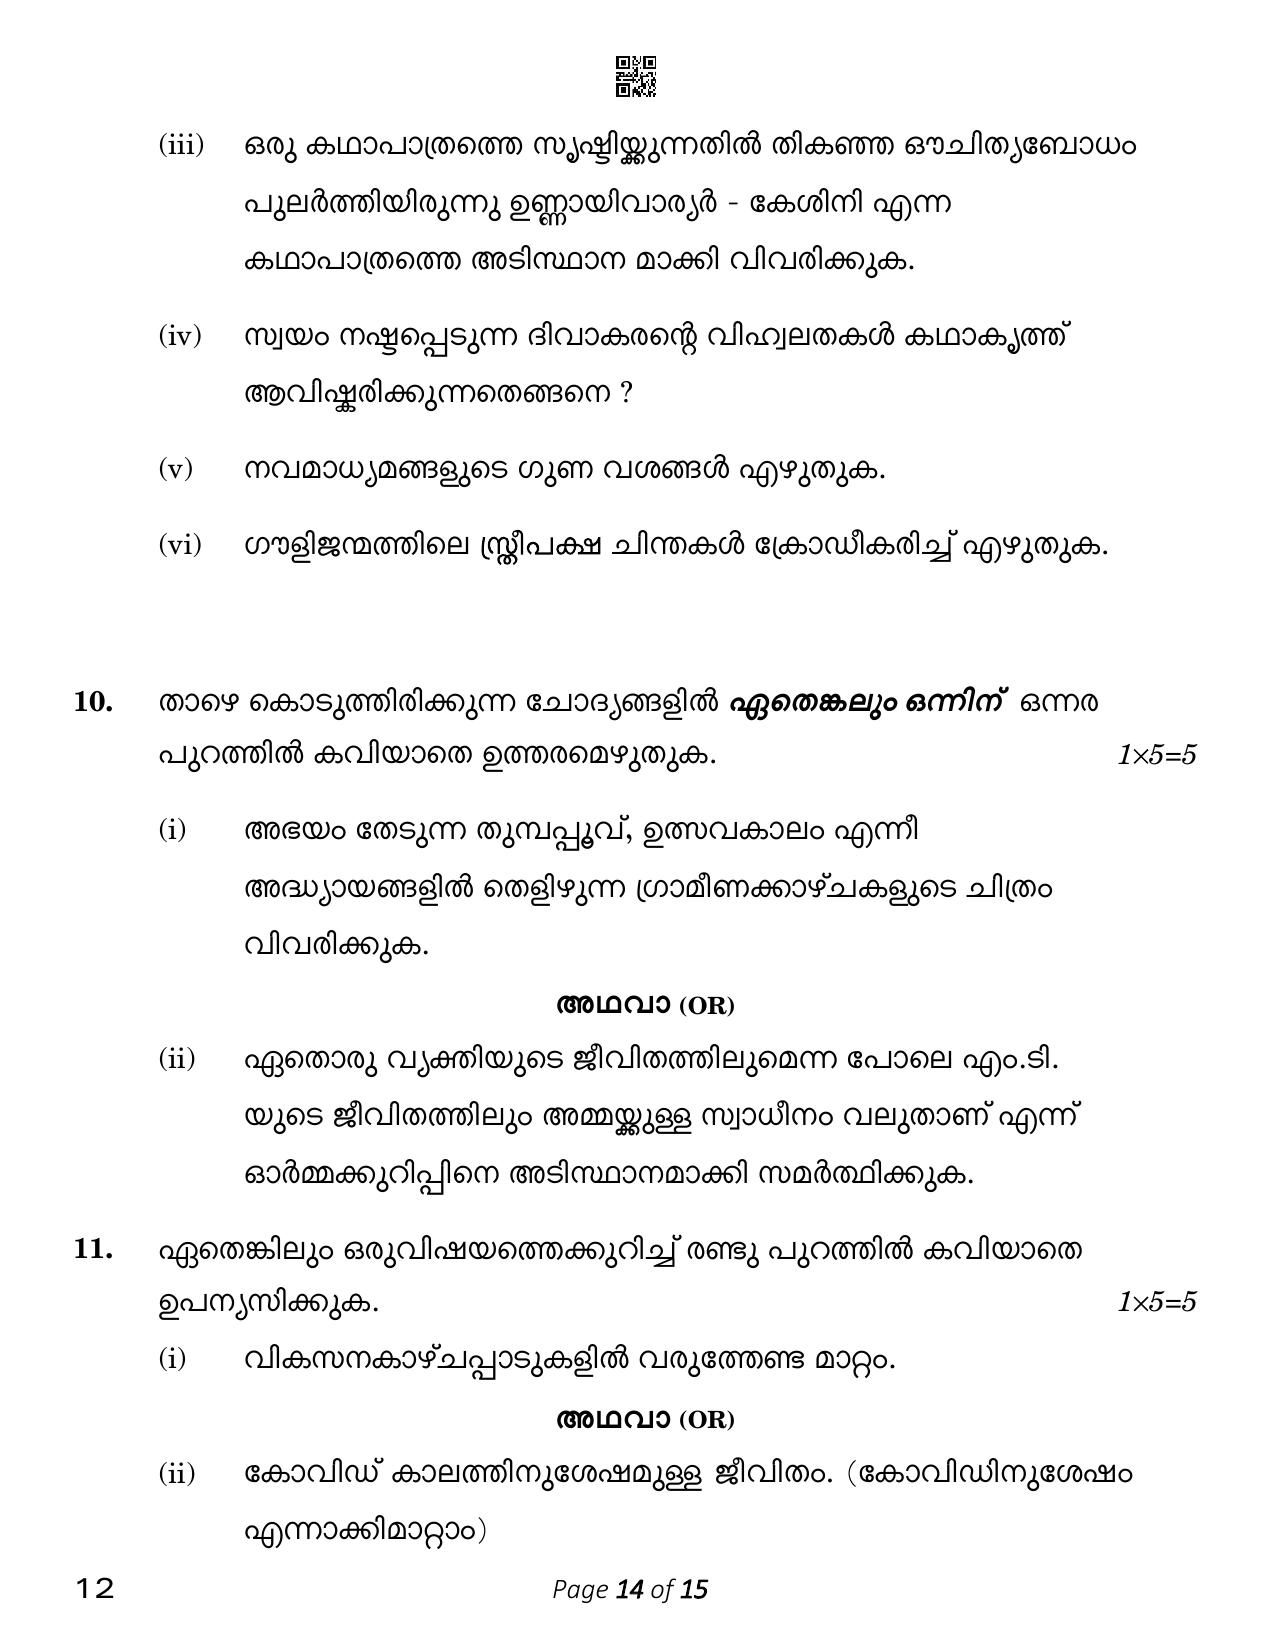 CBSE Class 12 Malayalam (Compartment) 2023 Question Paper - Page 14